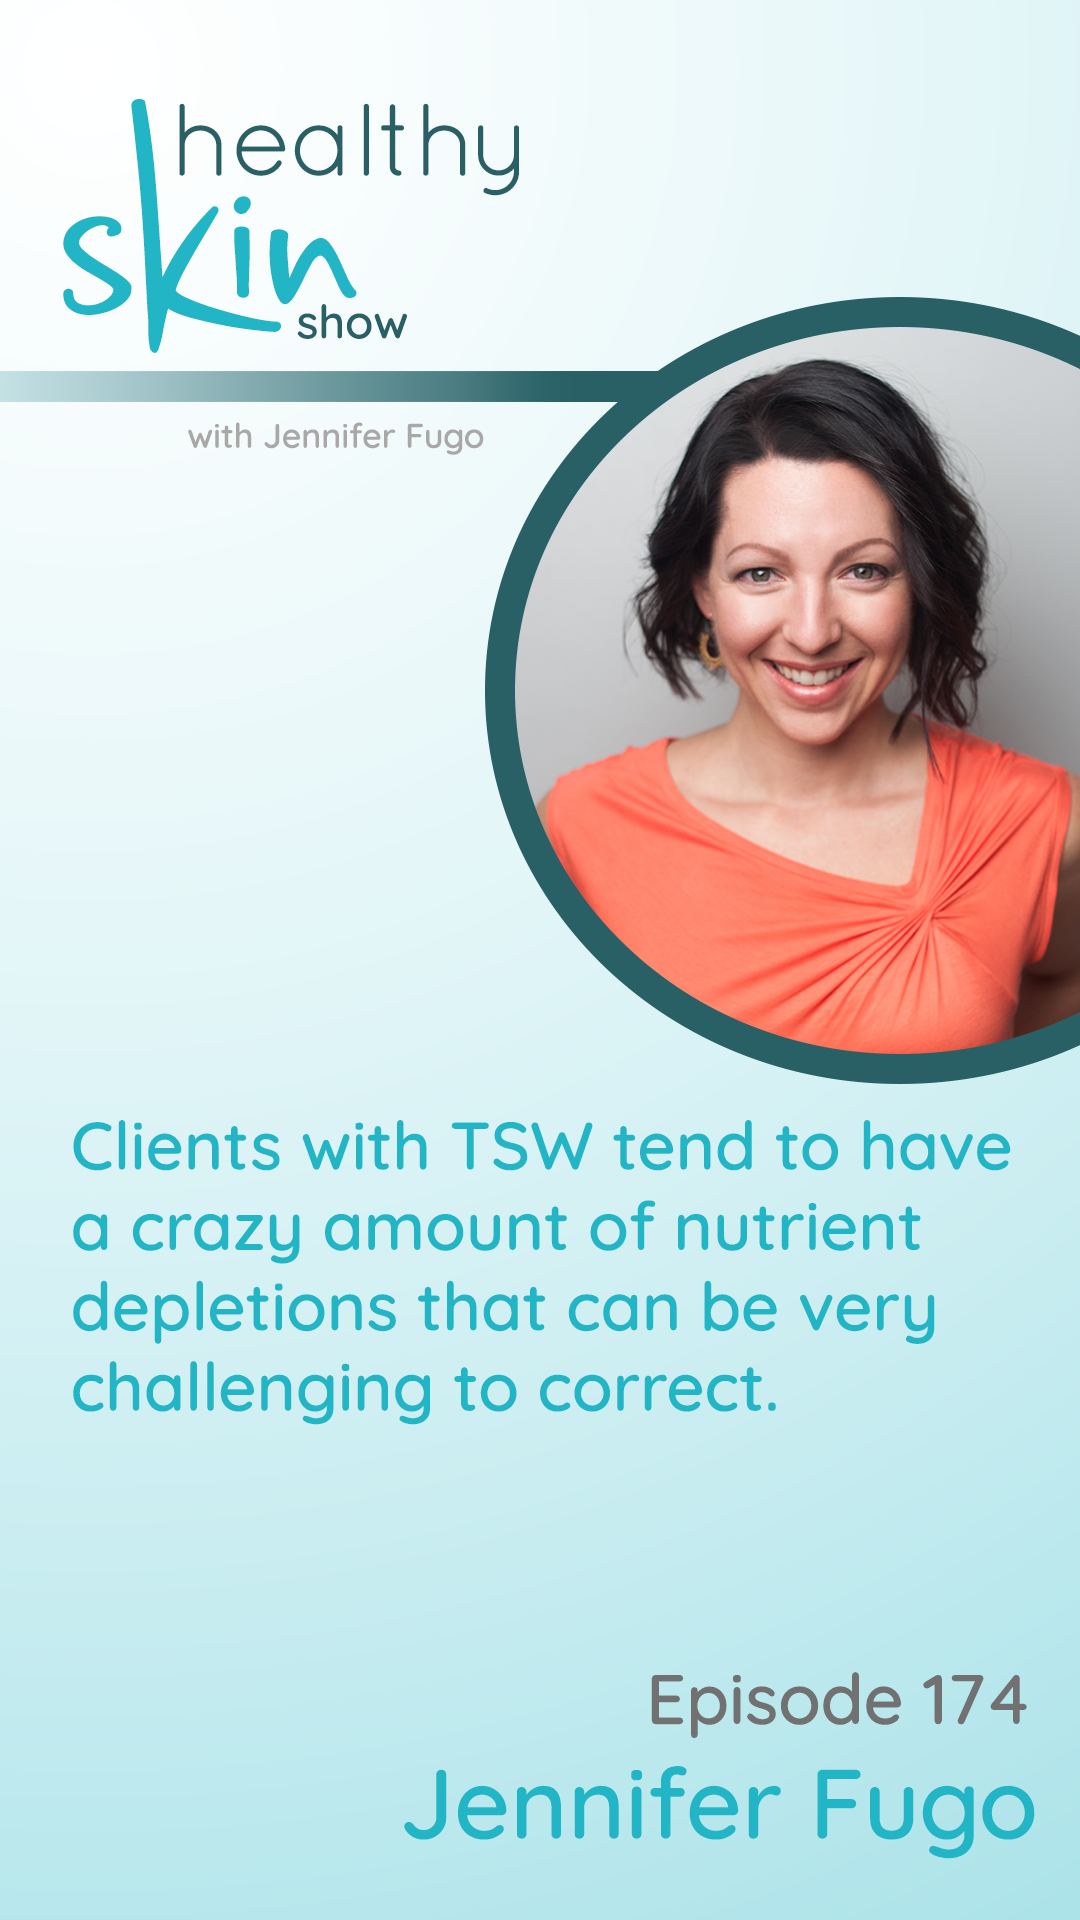 Clients with TSW tend to have a crazy amount of nutrient depletions that can be very challenging to correct.